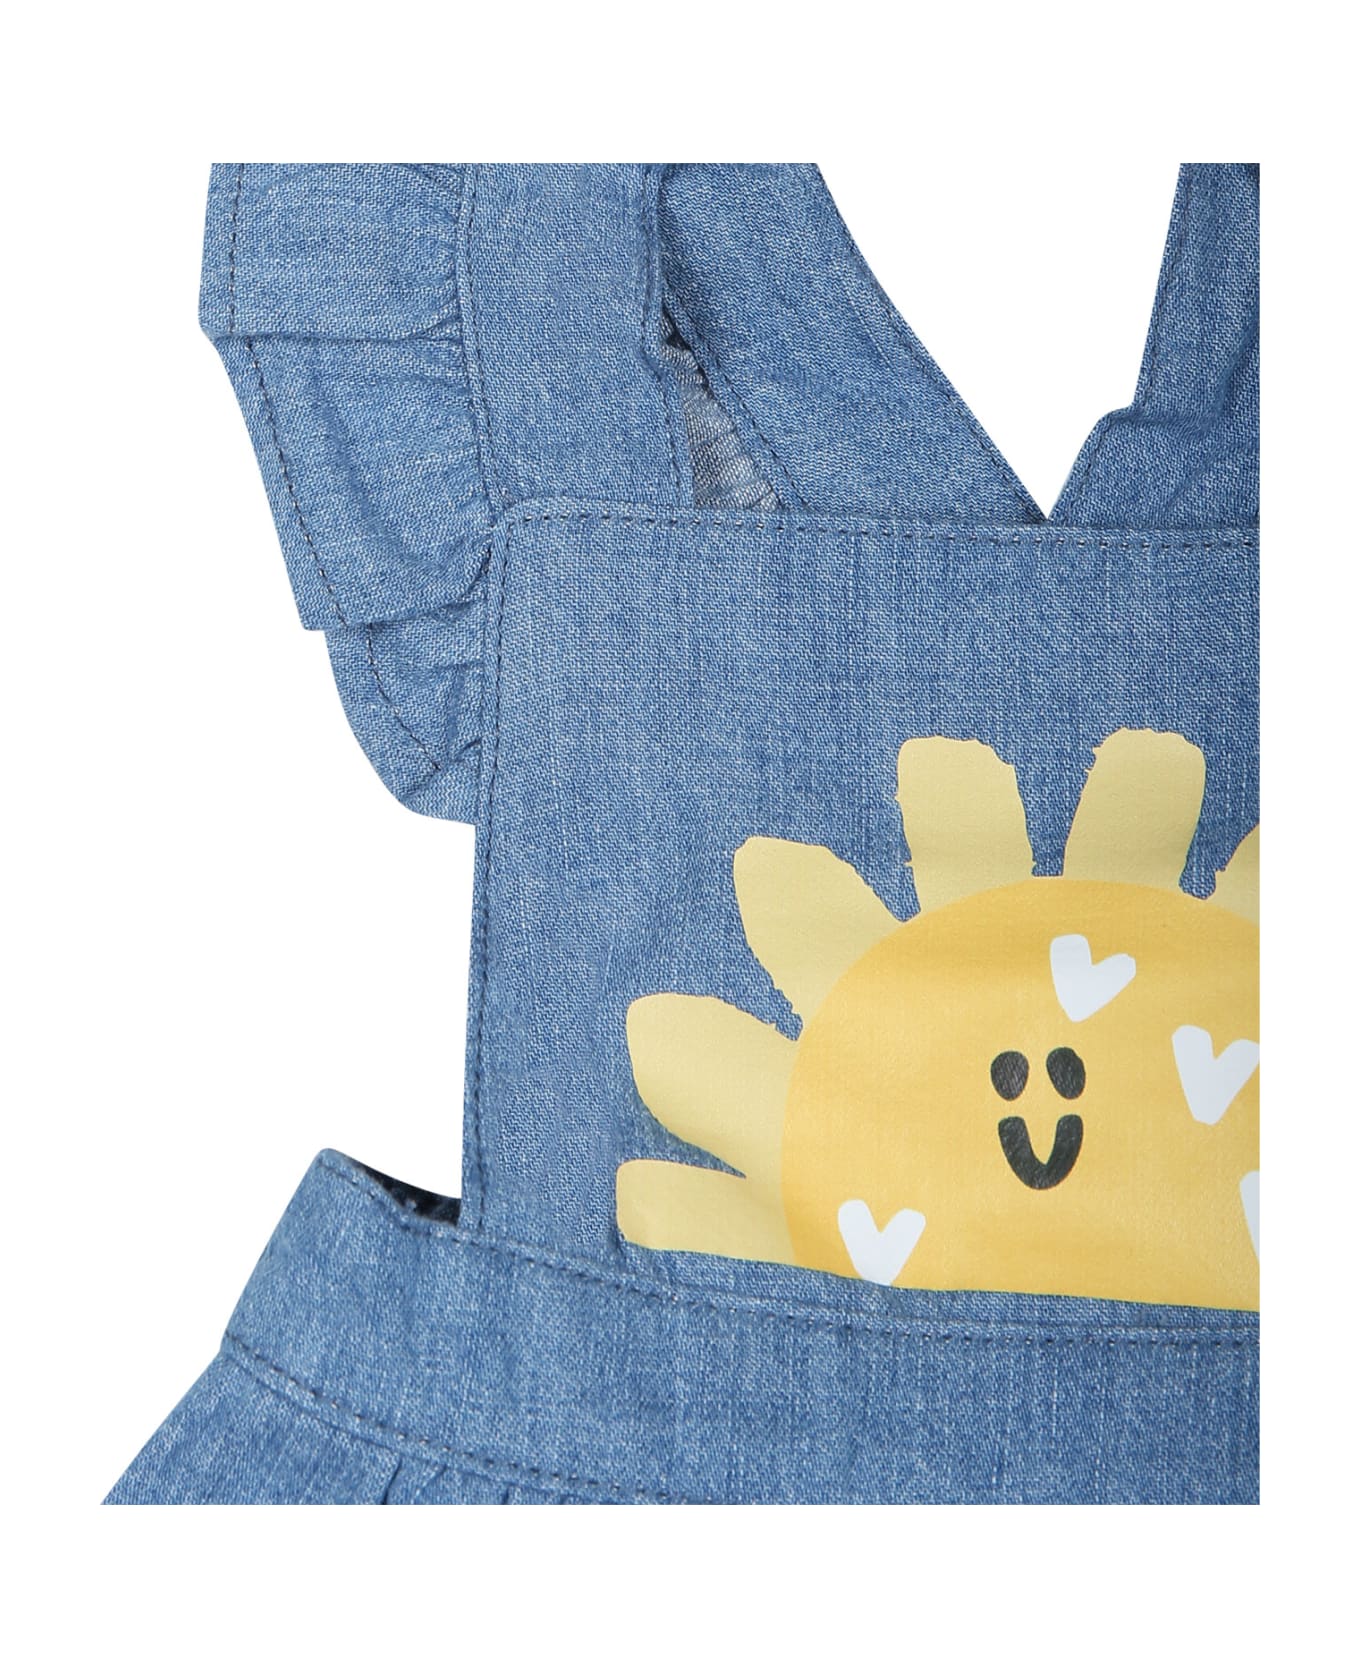 Stella McCartney Kids Blue Overalls For Baby Girl With Bees - Denim